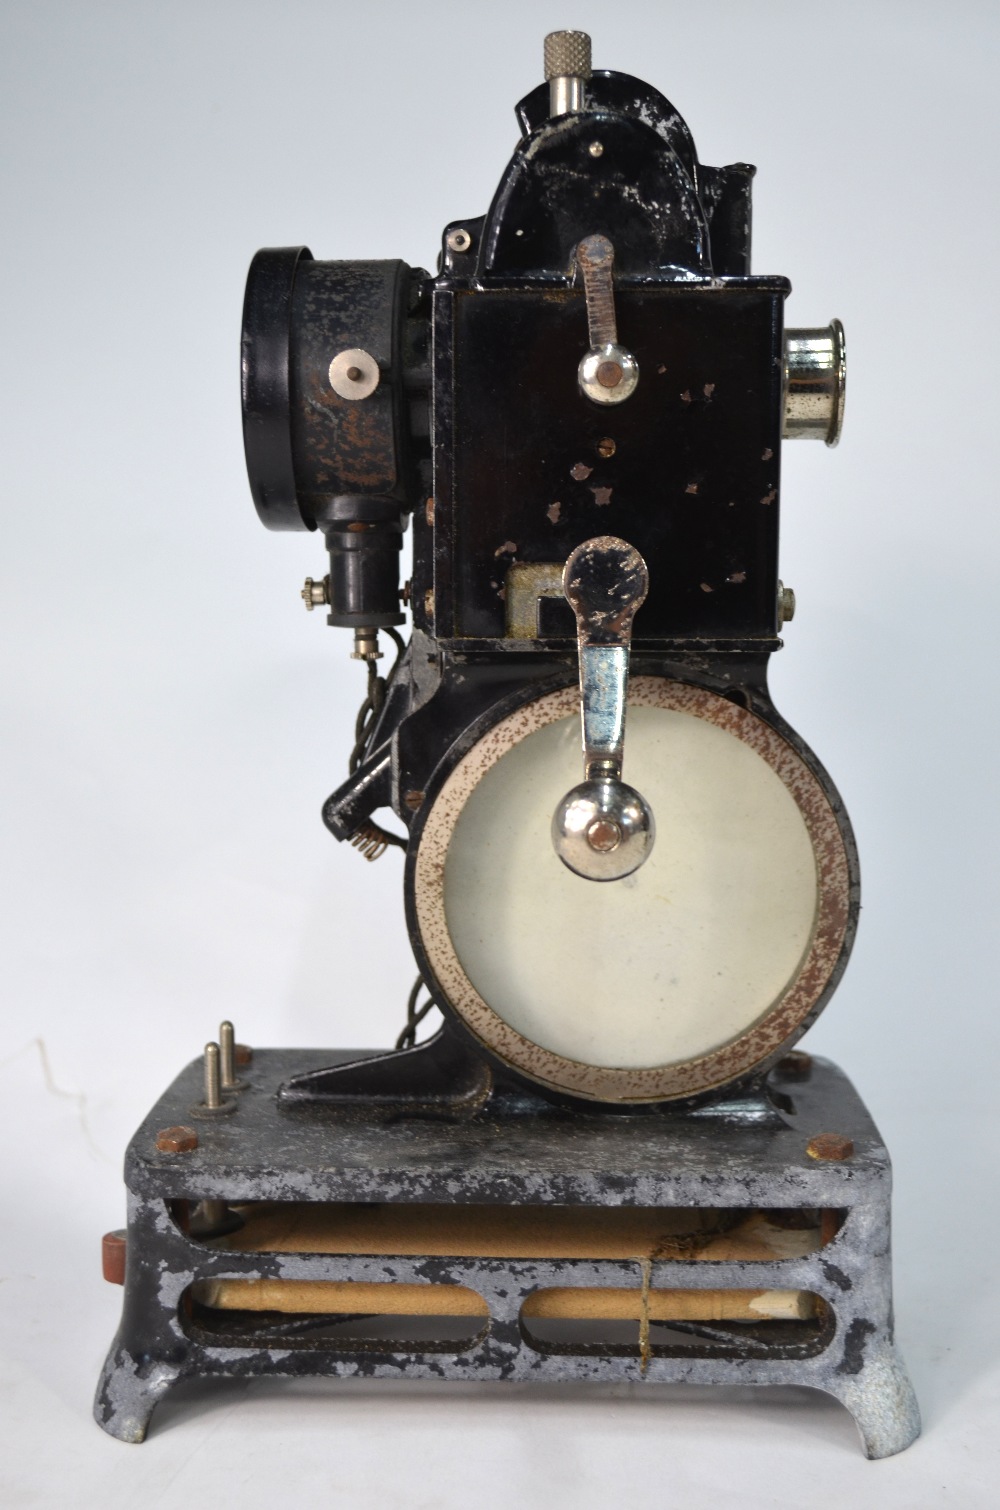 A French Pathe-Baby hand-cranked film projector, to/w a collection of film reels, - Image 5 of 7